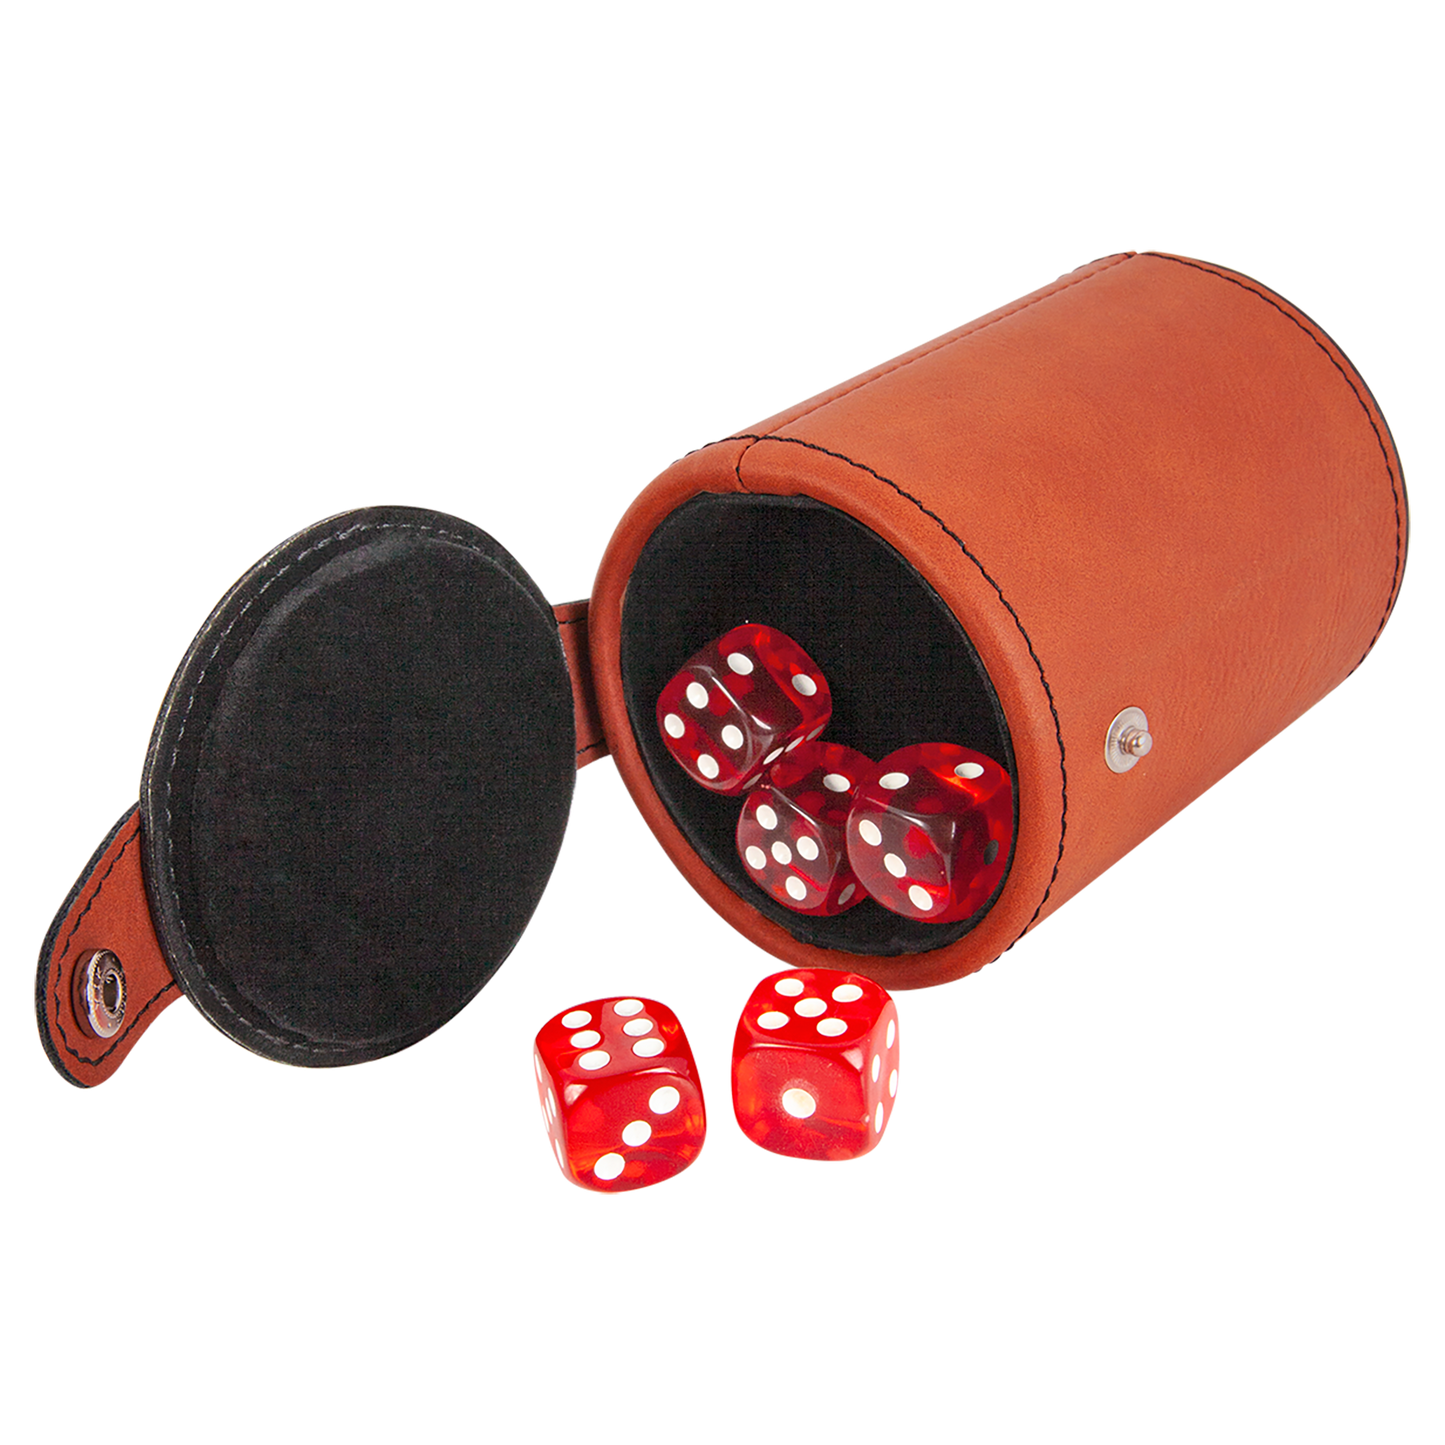 Personalized Dice Cup with 5 Dice